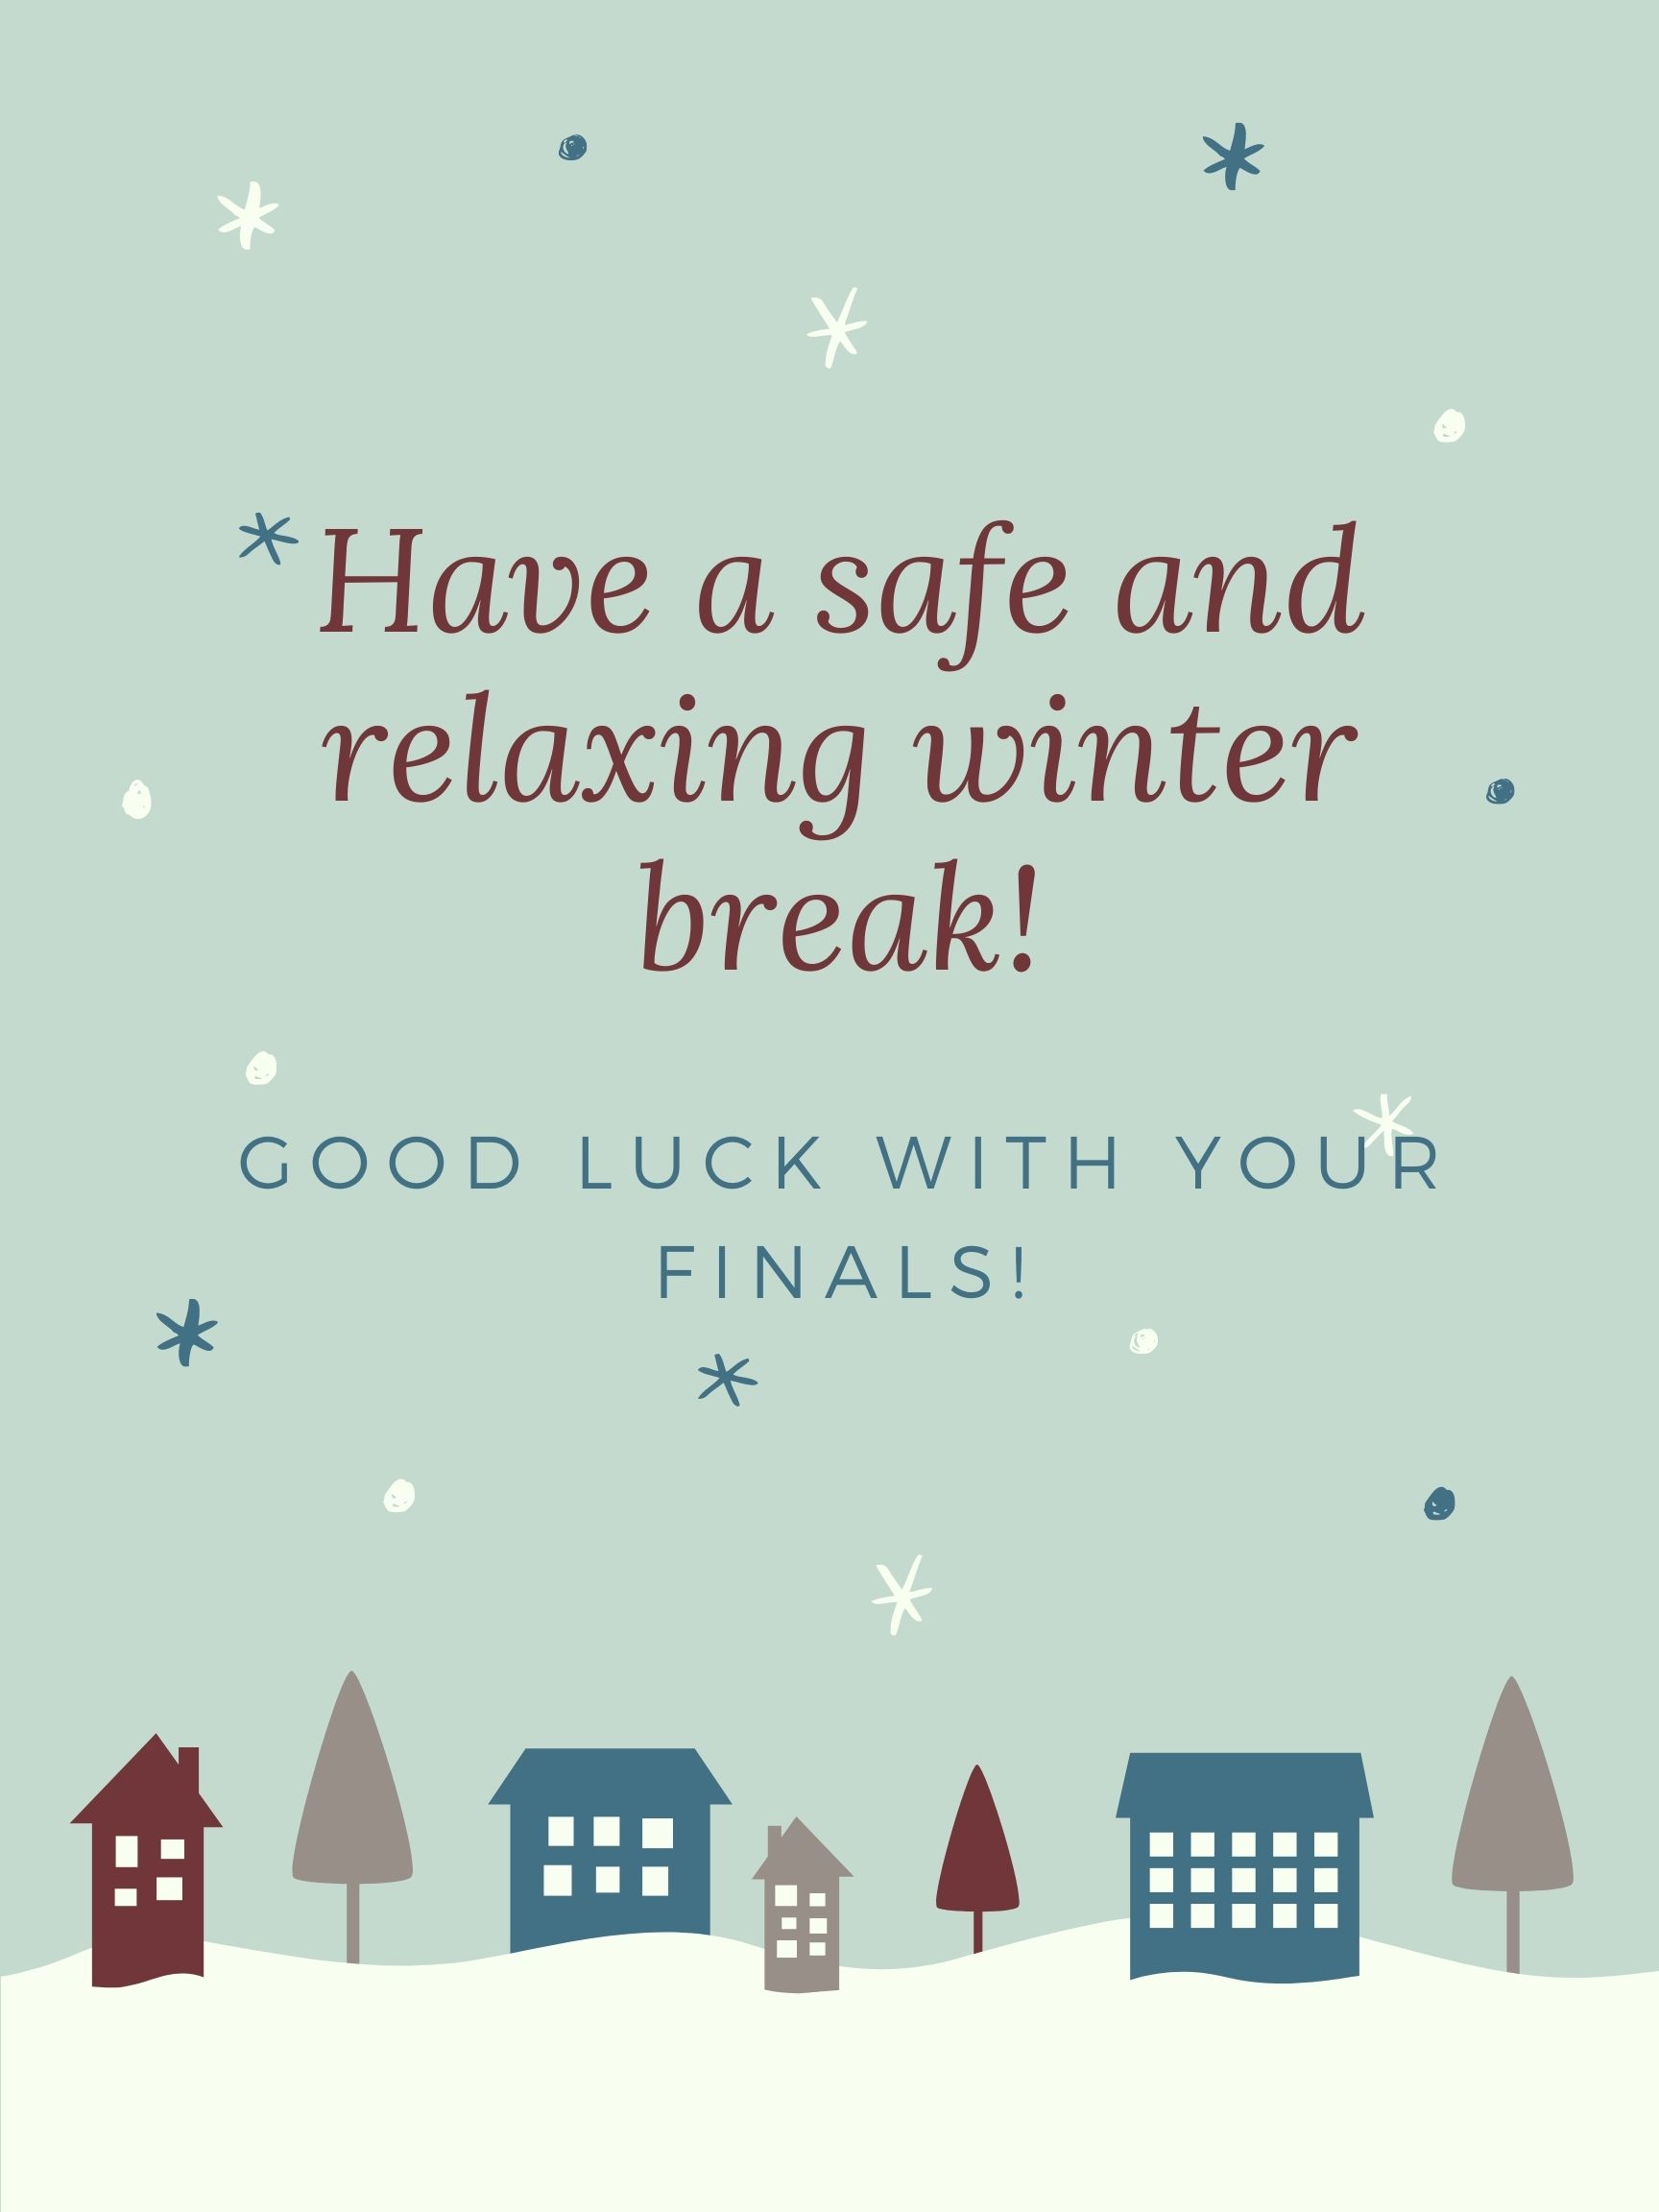 Have a safe and relaxing winter break!